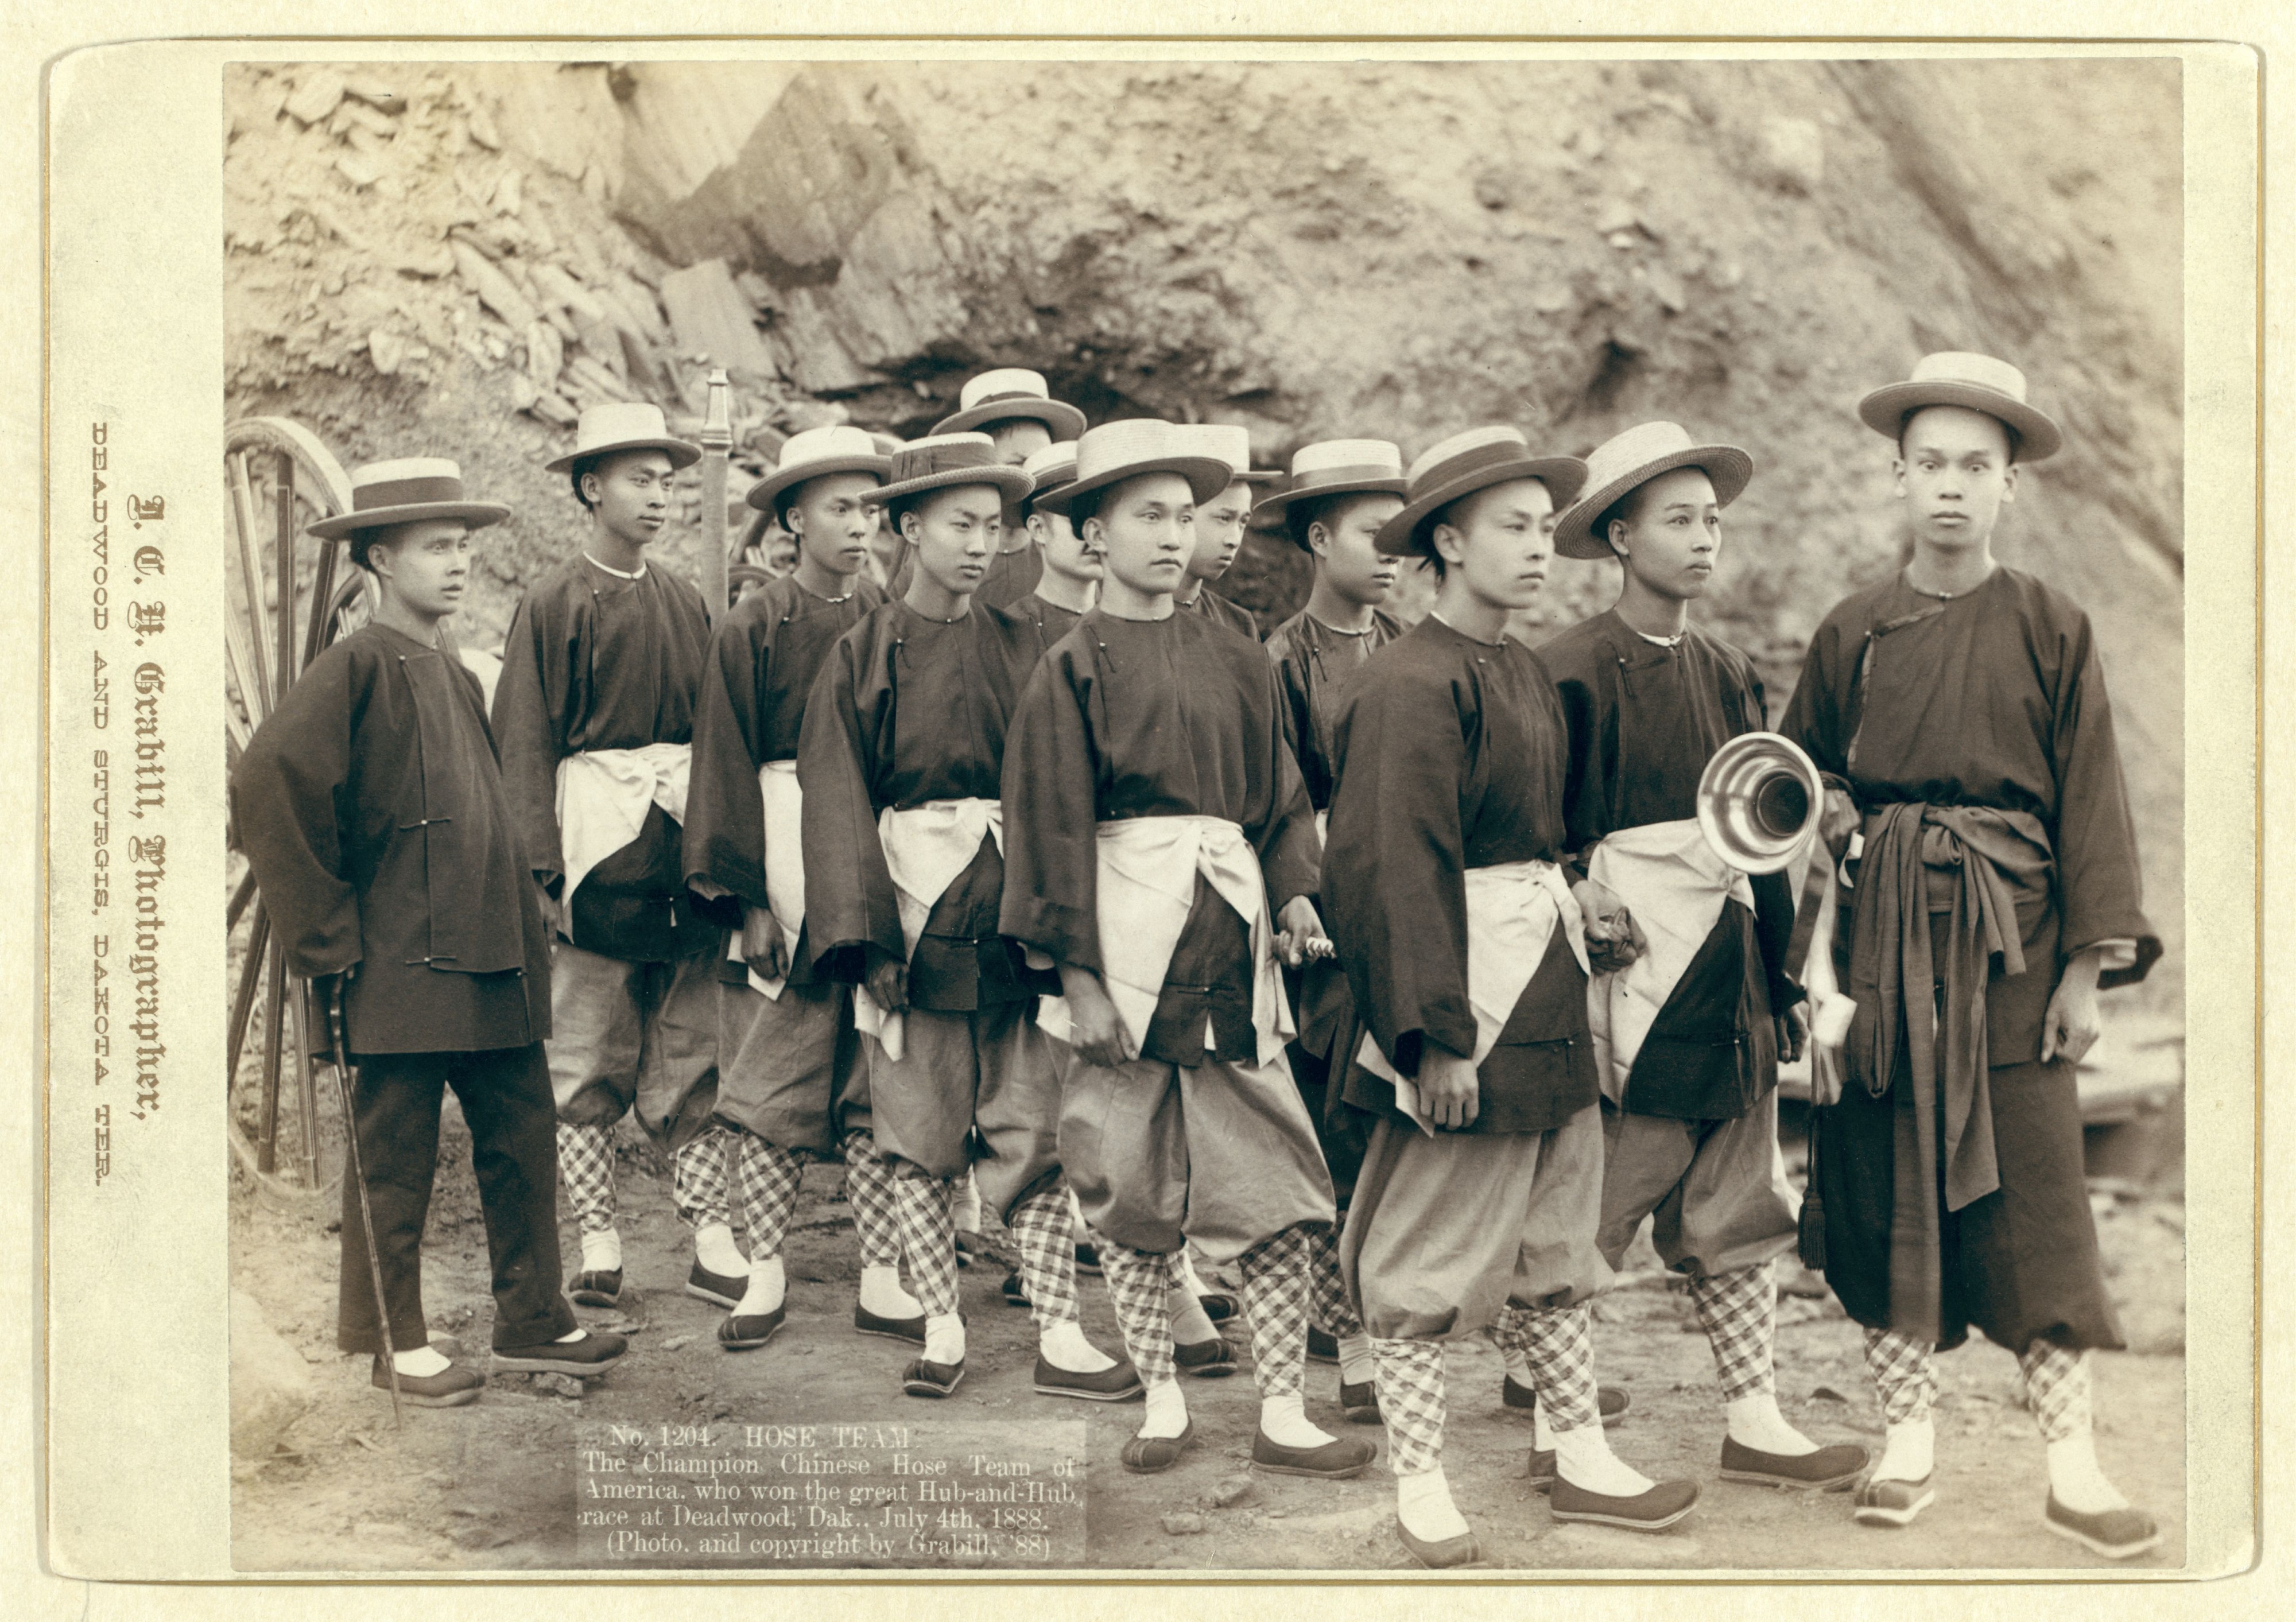 Grabill - The champion Chinese Hose Team of America, who won the great Hub-and-Hub race at Deadwood, Dakota, July 4th, 1888